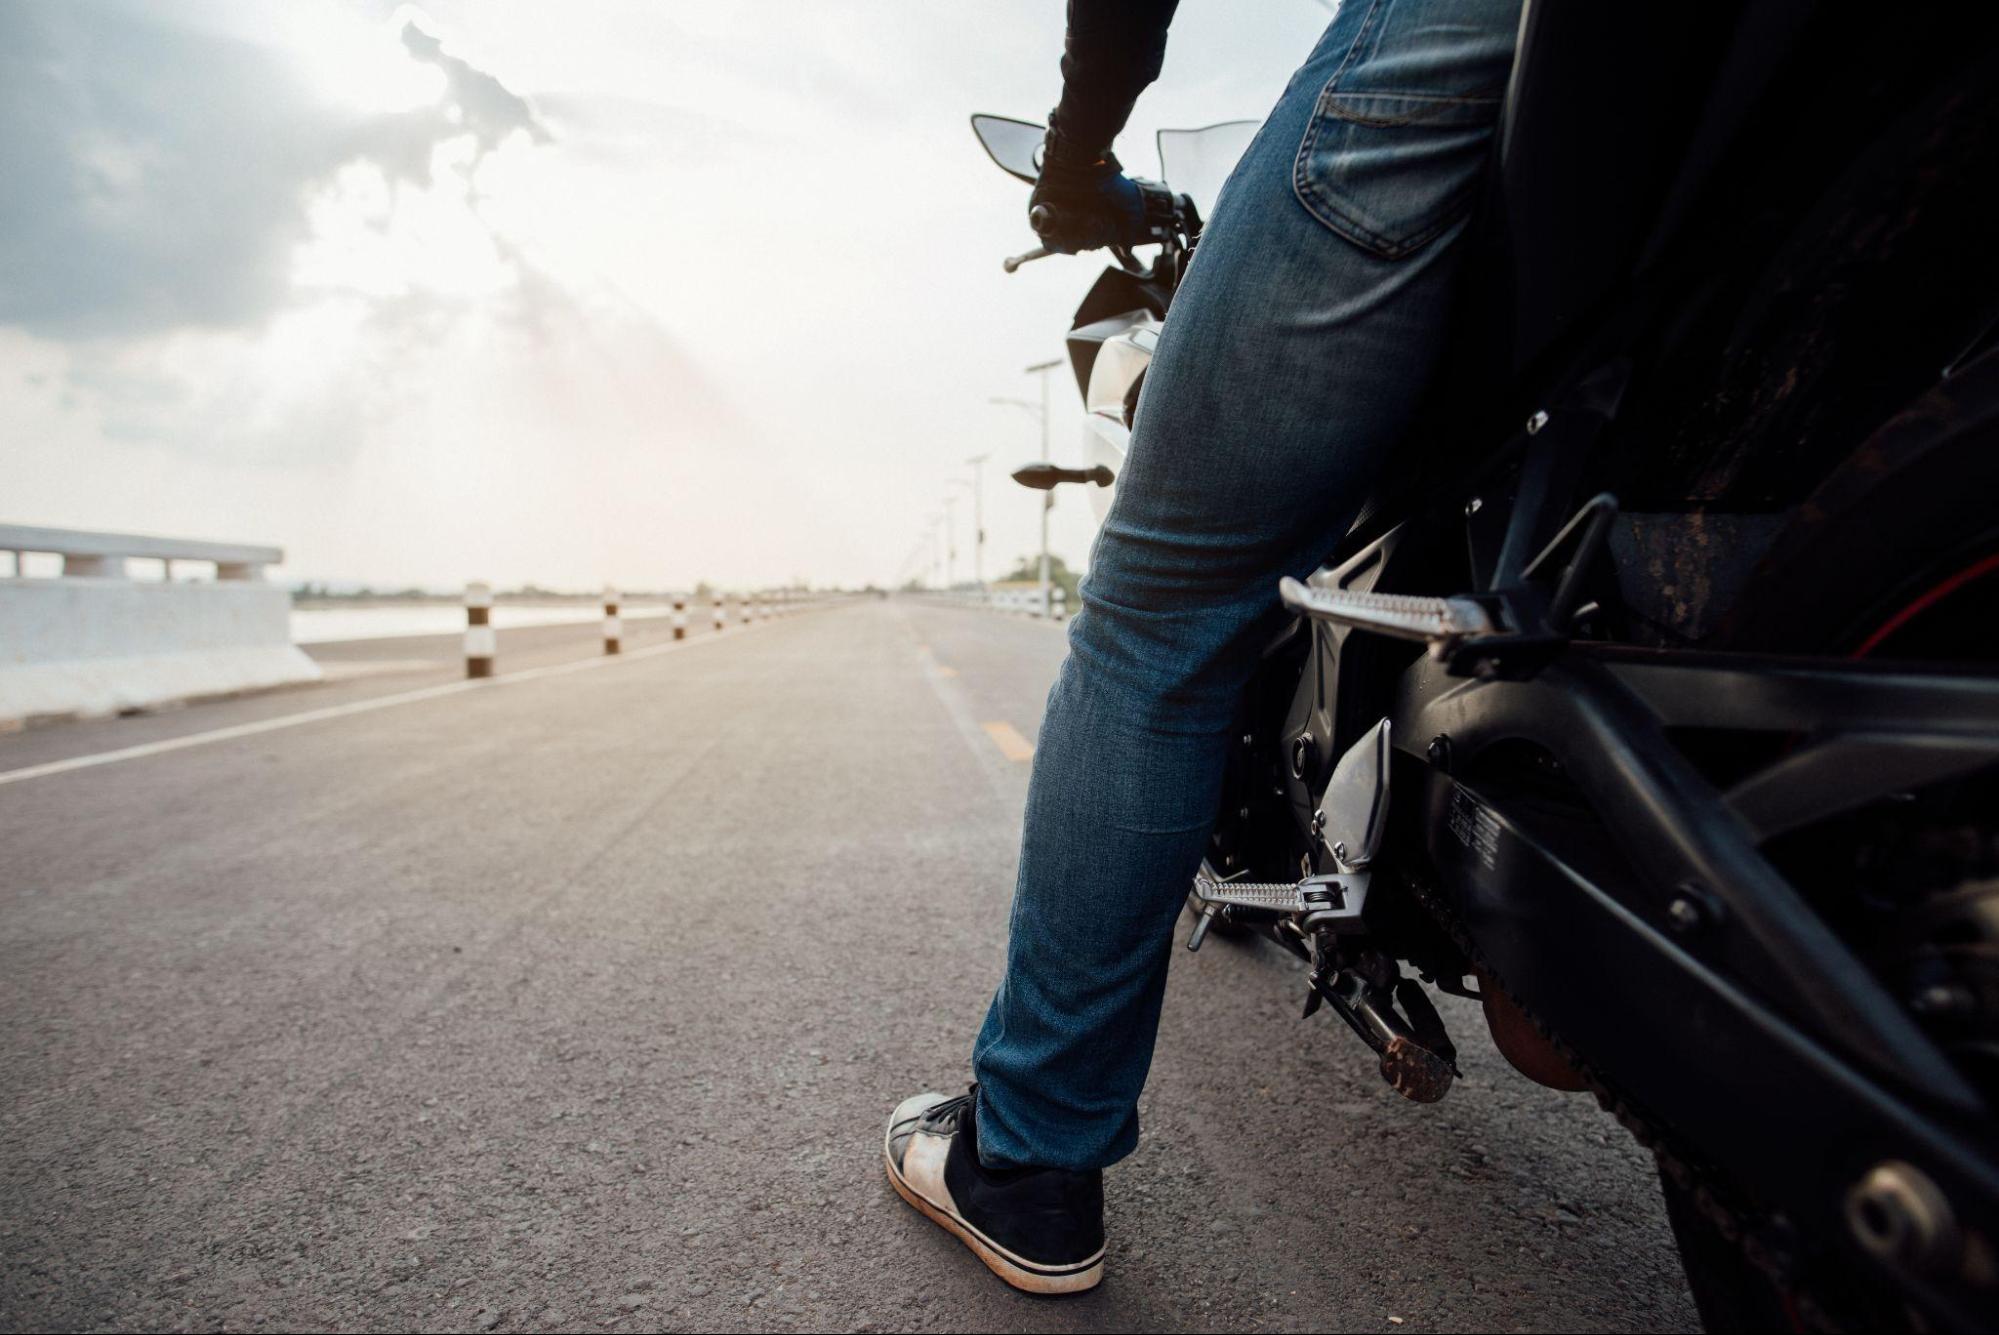 Traveling Out of Town on a Motorcycle? Absolutely! Here's What You Need to Pay Attention to